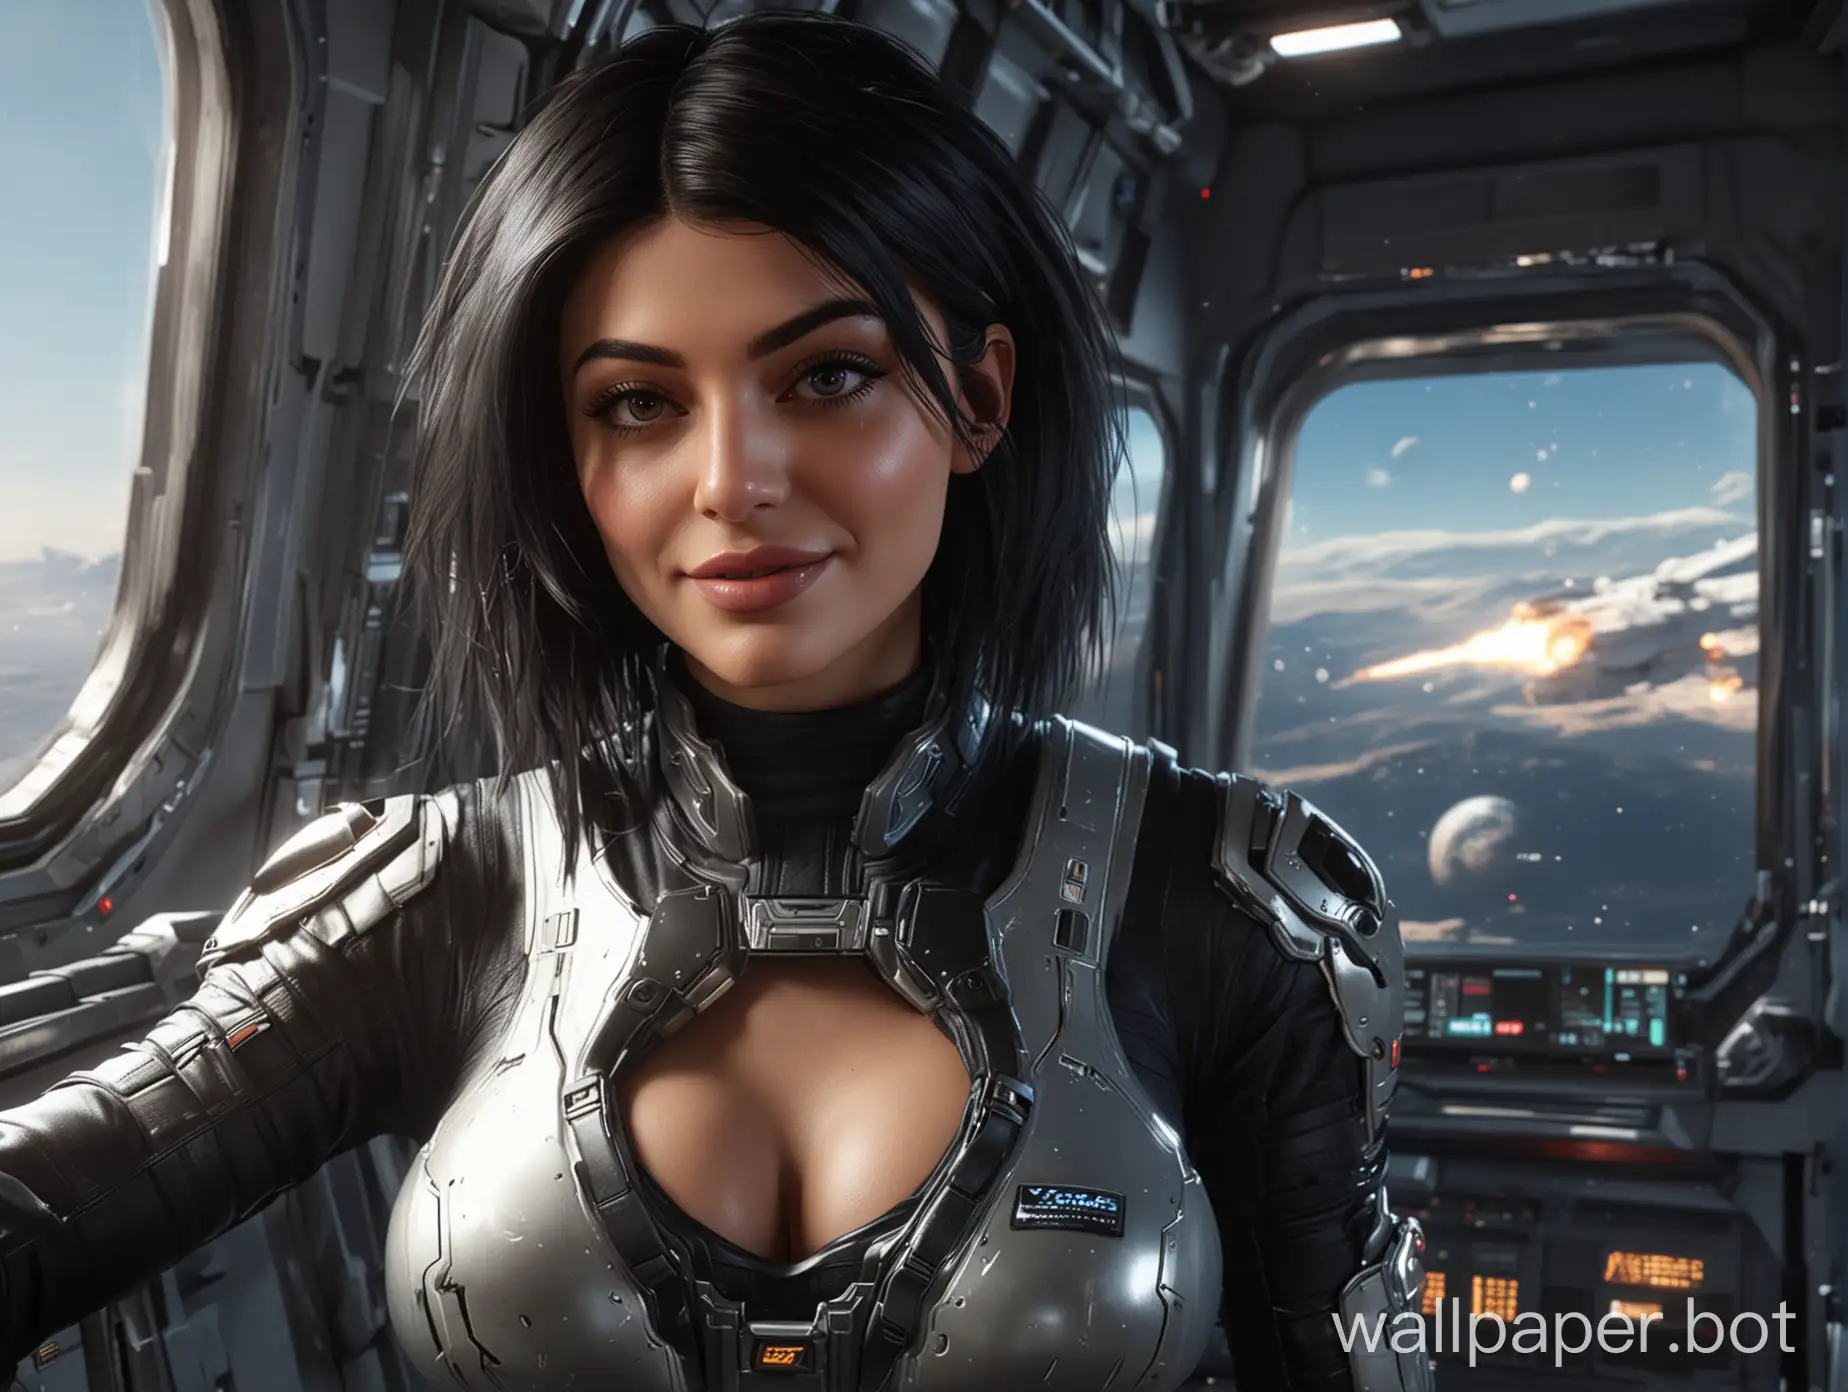 Star Citizen Videogame, female pilot with kylie jenner face taking selfie,  Science-Fiction, close-up headshot, Wear sporty cyberoutfit with cleavage , curvy female bodyshape, stars and planet through a window in the background, black shoulder long hair, natural black eyes, open smiling with showing teeth, over-the-shoulder shot